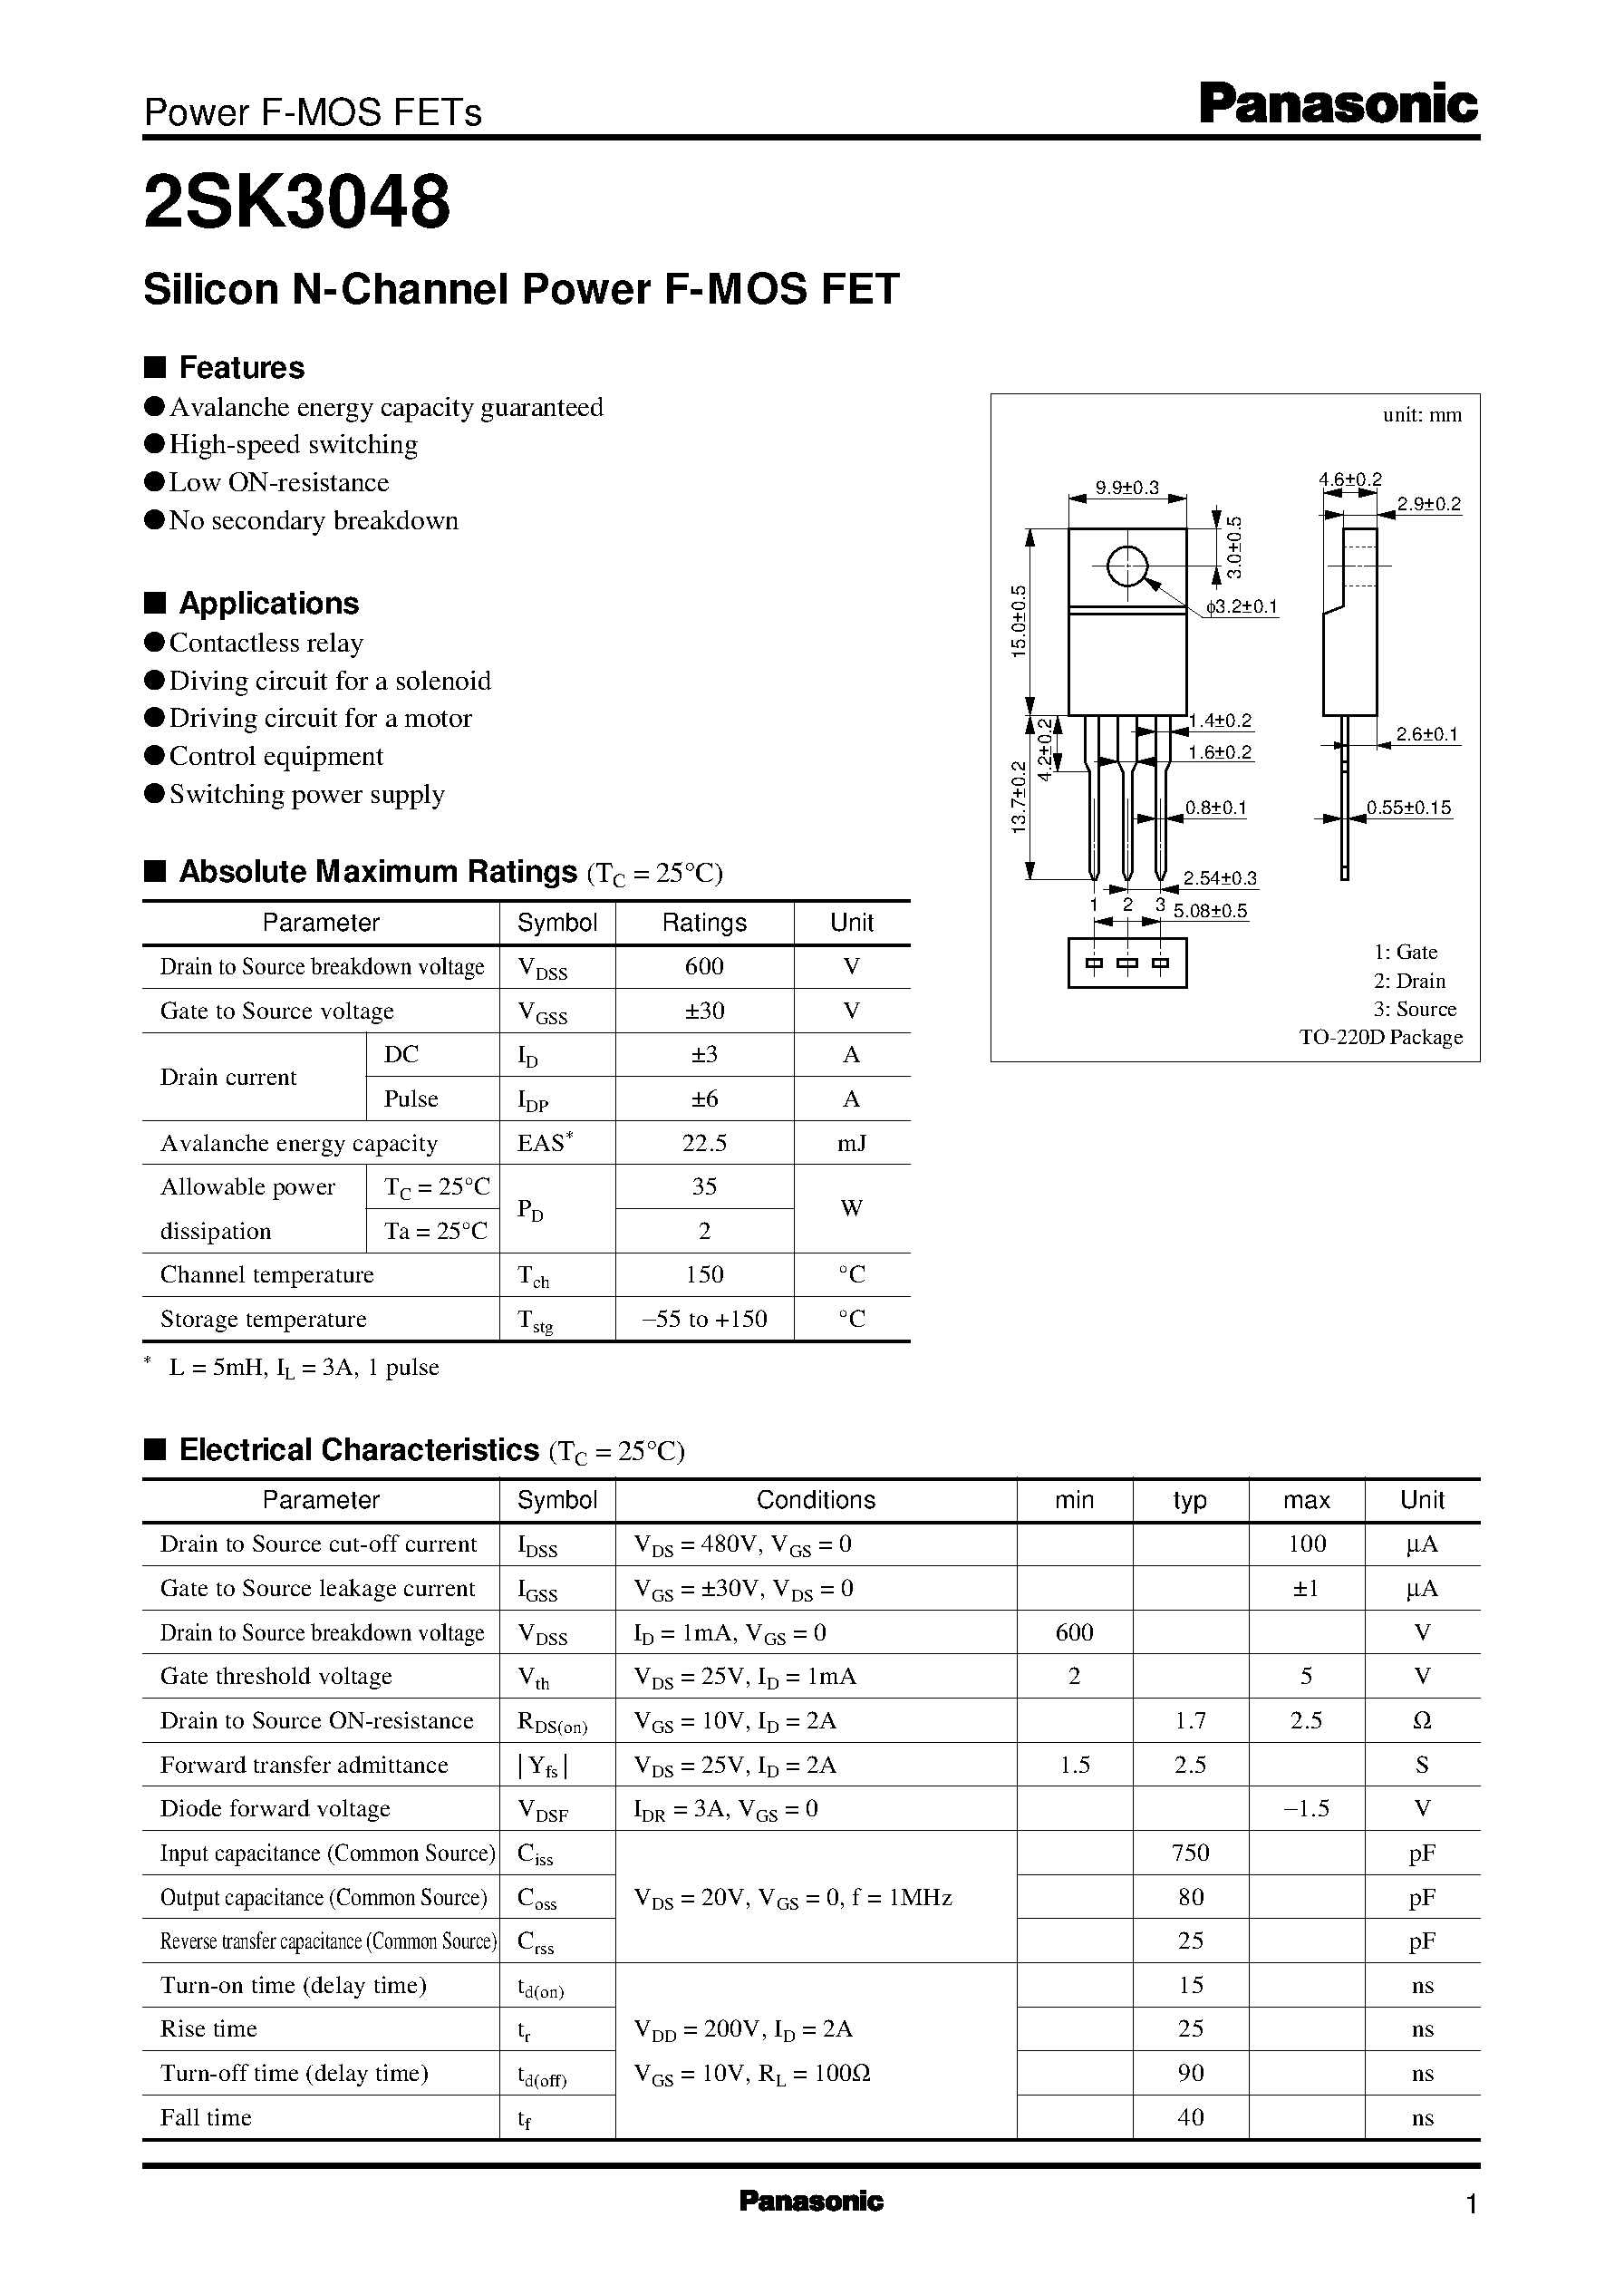 Datasheet 2SK3048 - Silicon N-Channel Power F-MOS FET page 1